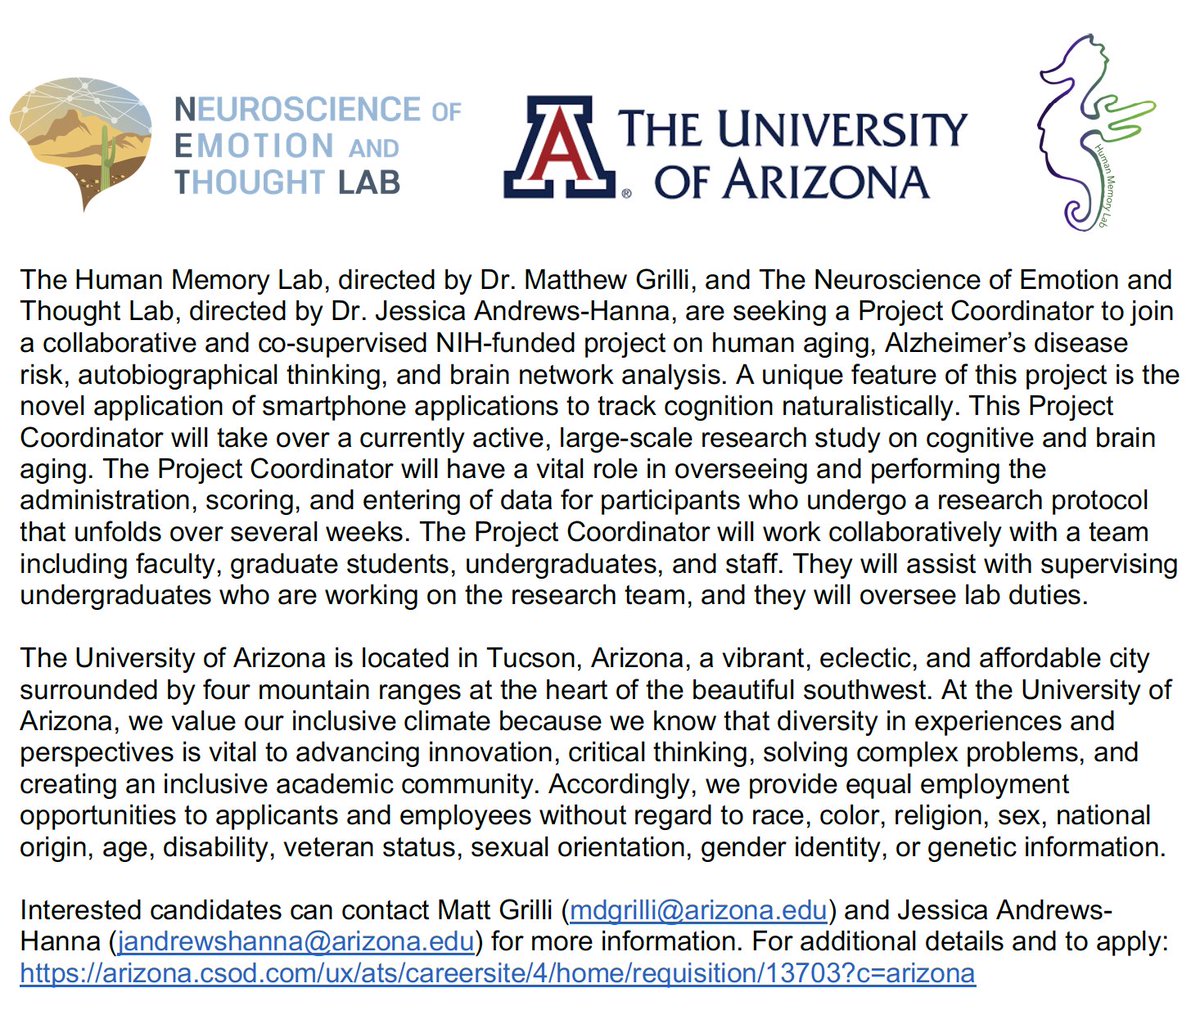 Jessica Andrews-Hanna and I are hiring a project coordinator for a study on aging and Alzheimer's disease risk factors. Brains, blood, smartphones, and neuropsych. Please spread the word. Link to description of position and how to apply: arizona.csod.com/ux/ats/careers…